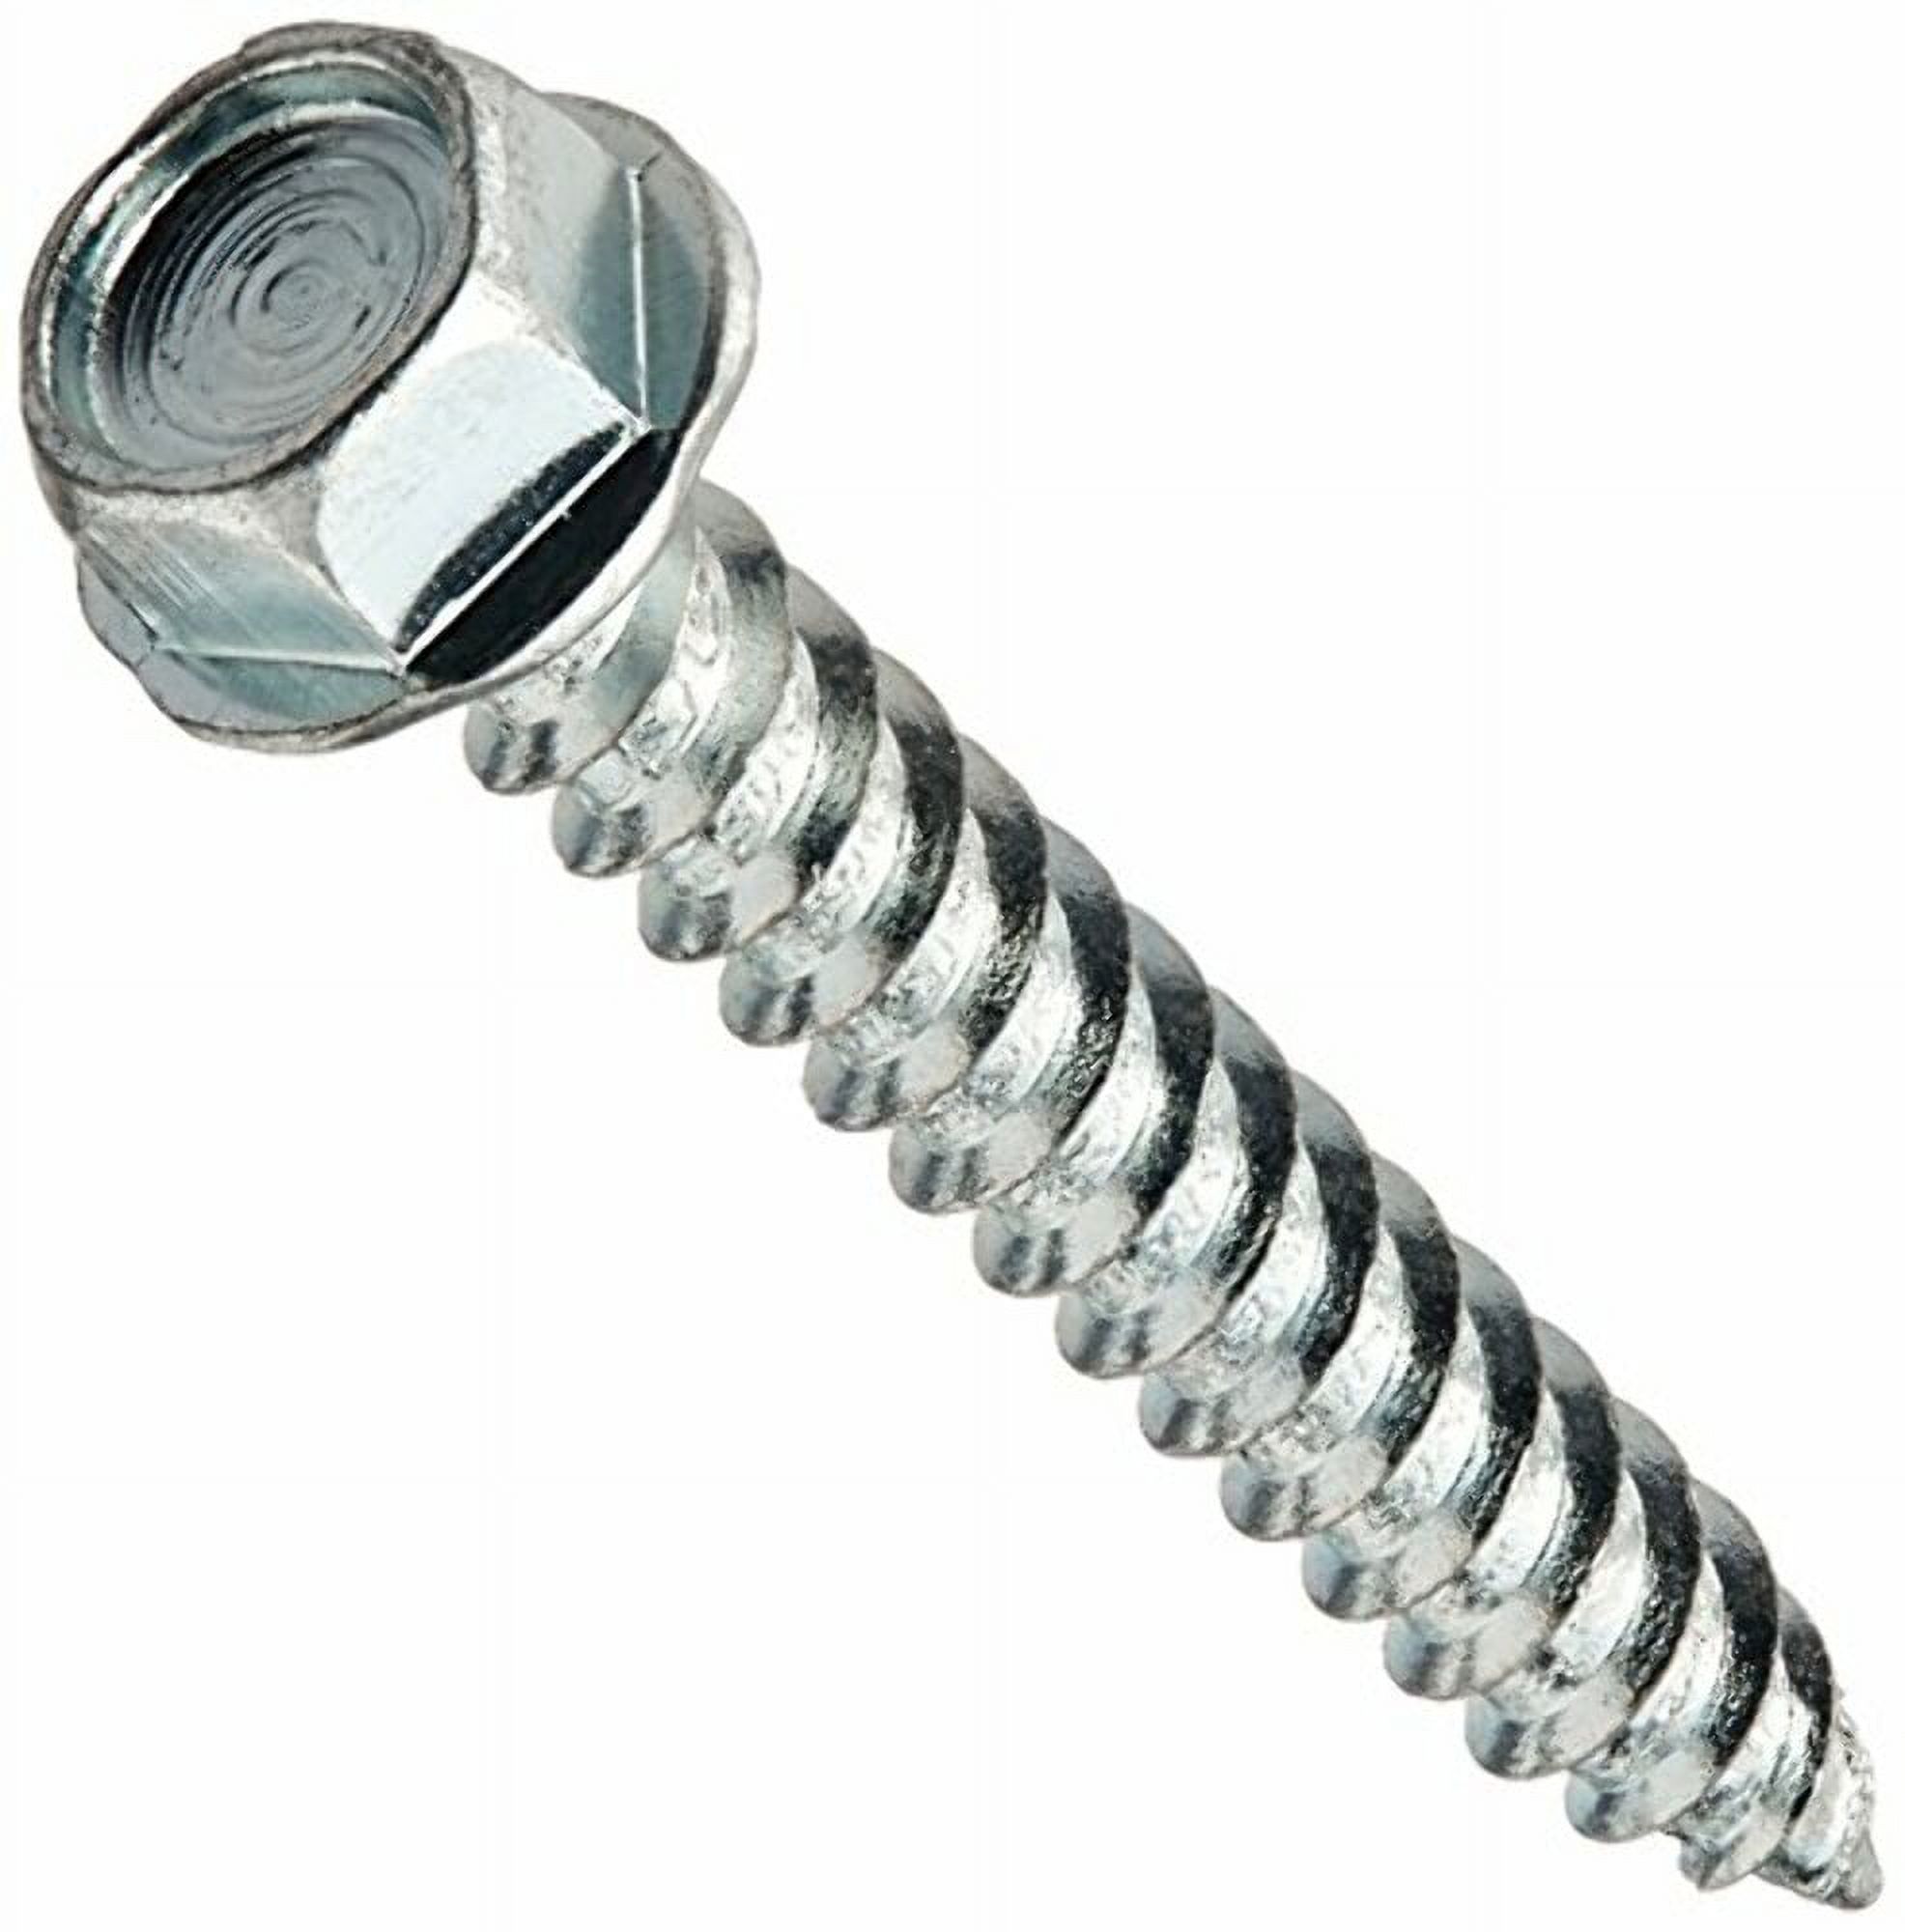 AP Products 012-TR500 8 X 1-1/4 8 x 1-1/4" MH/RV Hex Washer Head Screw 500 Pack - image 2 of 6